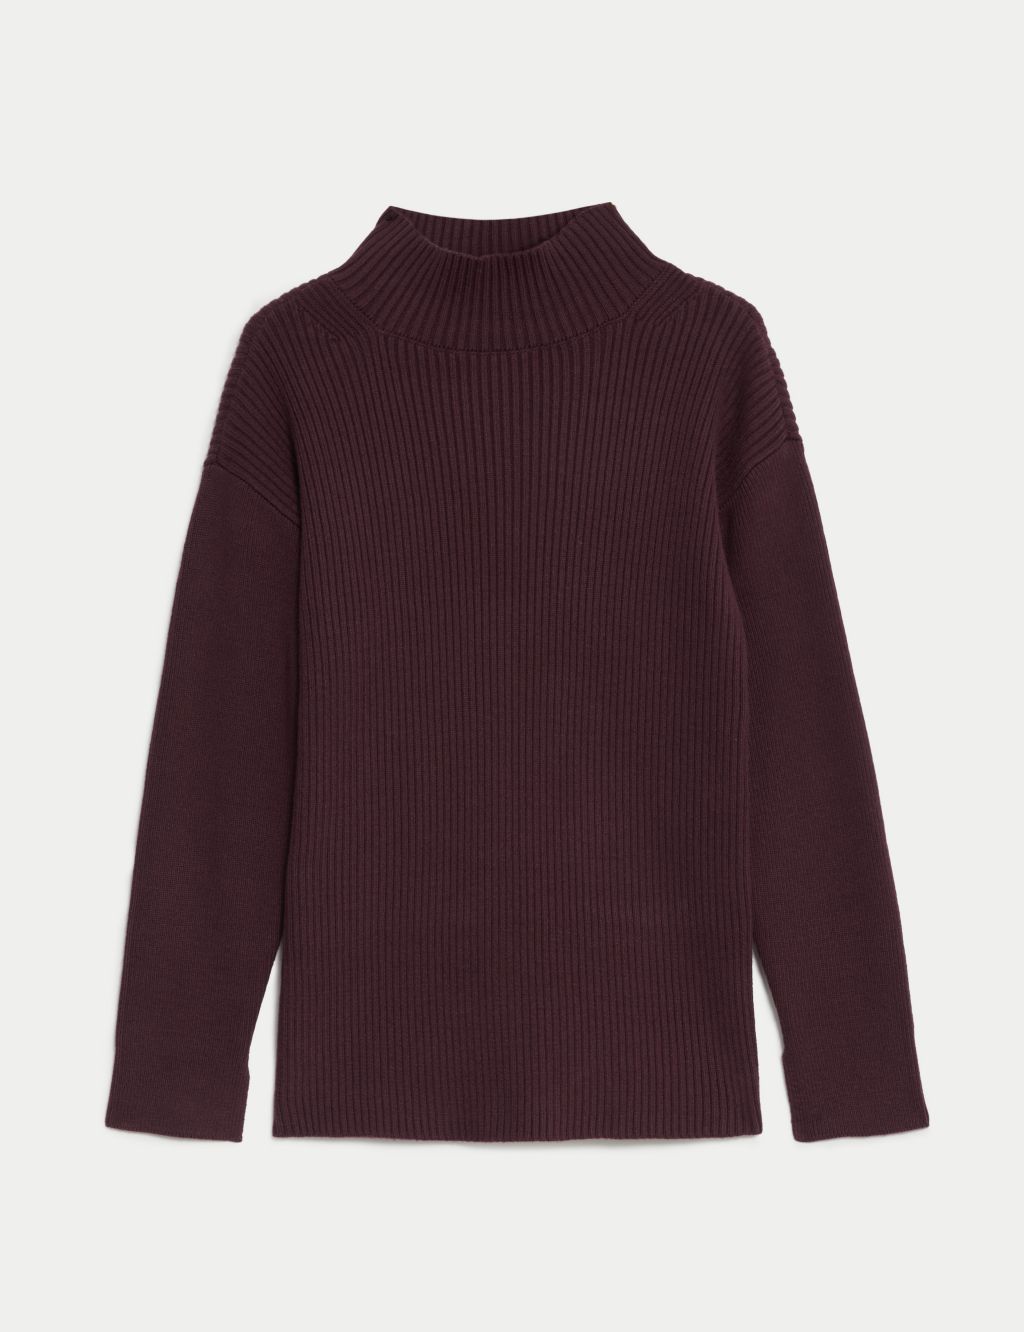 Cotton Rich Ribbed Jumper with Merino Wool image 2